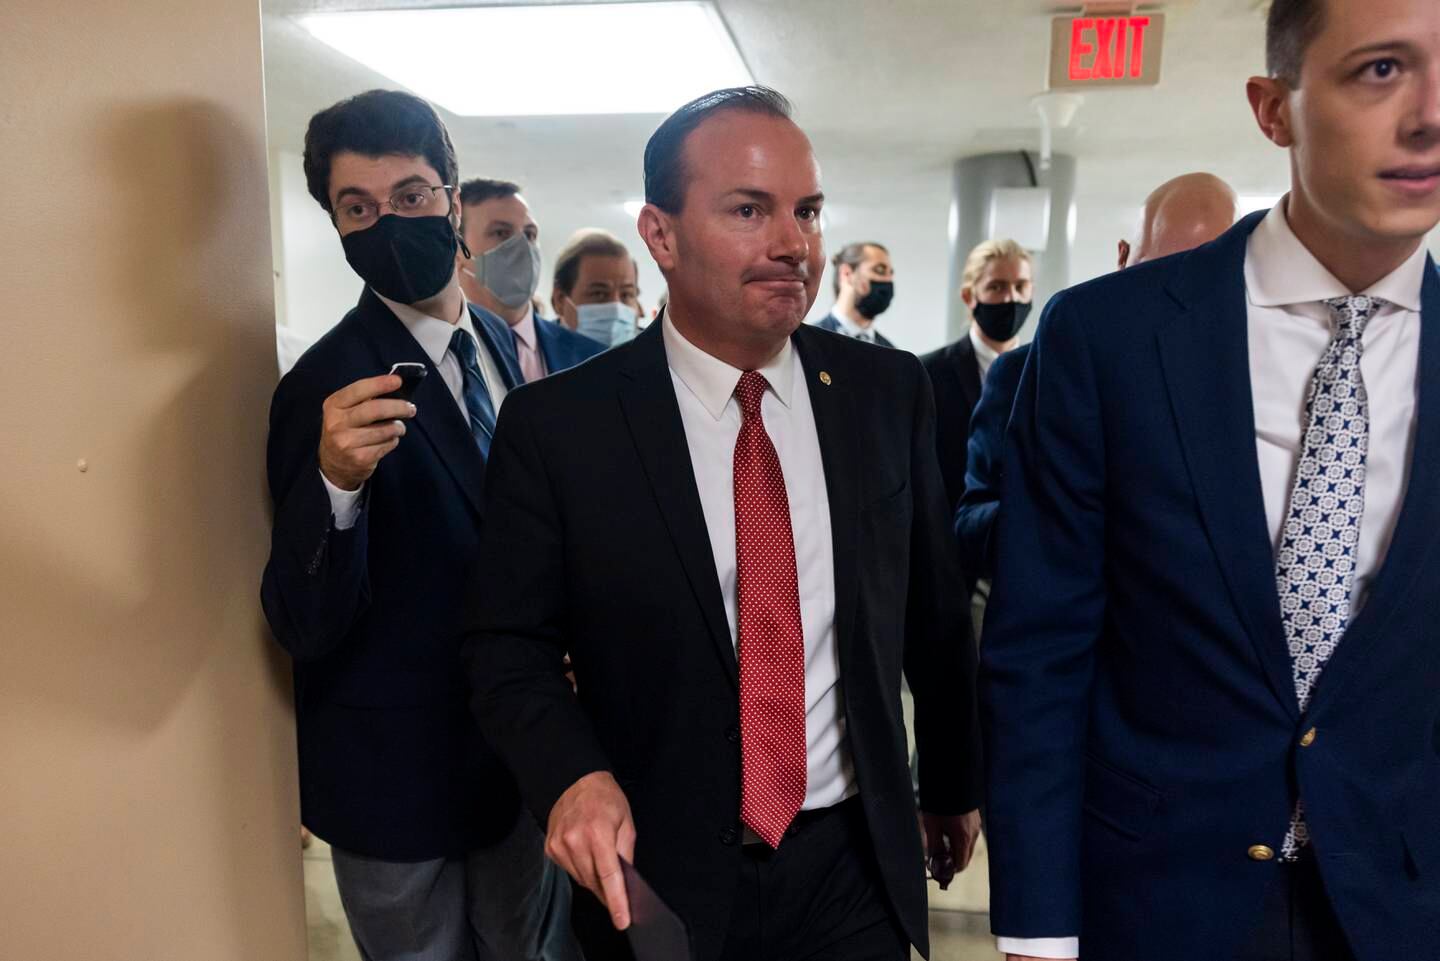 Mike Lee, a senator from Utah, walks to the Senate floor after threatening to force a government shutdown to block President Biden's vaccine mandate. EPA